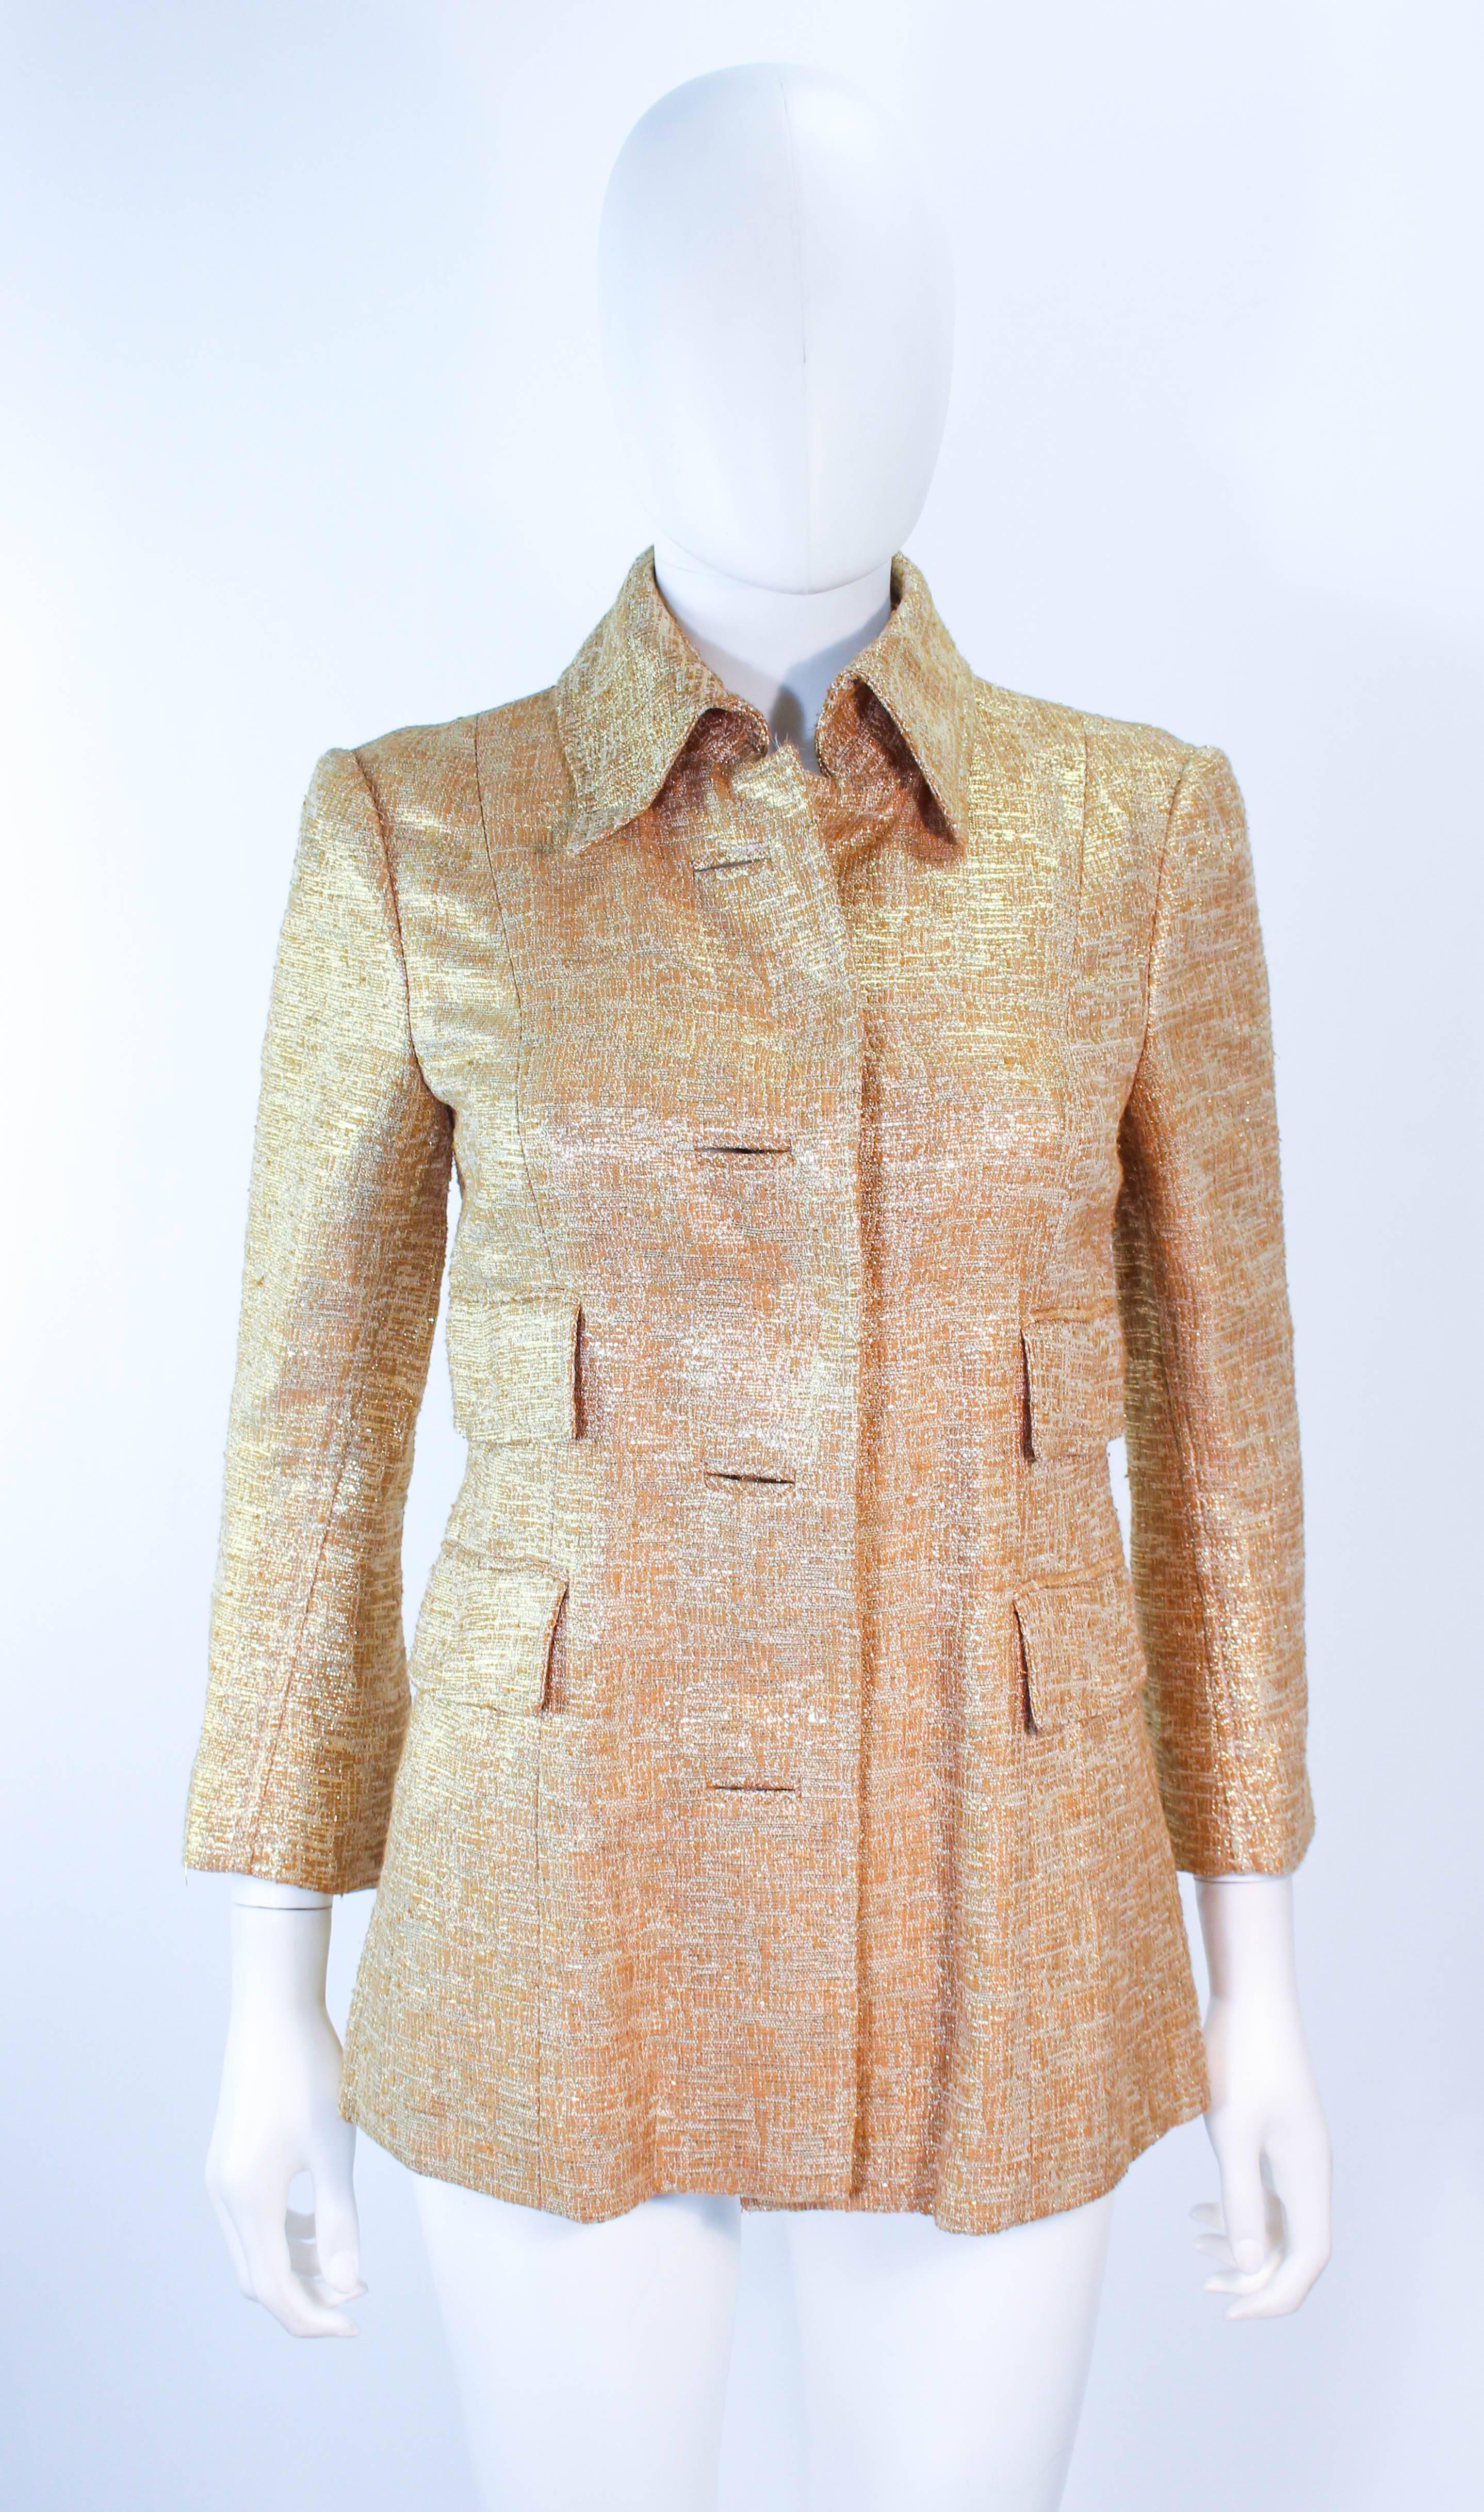 This Dolce and Gabbana jacket is composed of a gold metallic fabric Features center front snap buttons with a faux accent. There are front pockets. In excellent pre-condition.

**Please cross-reference measurements for personal accuracy. Size in